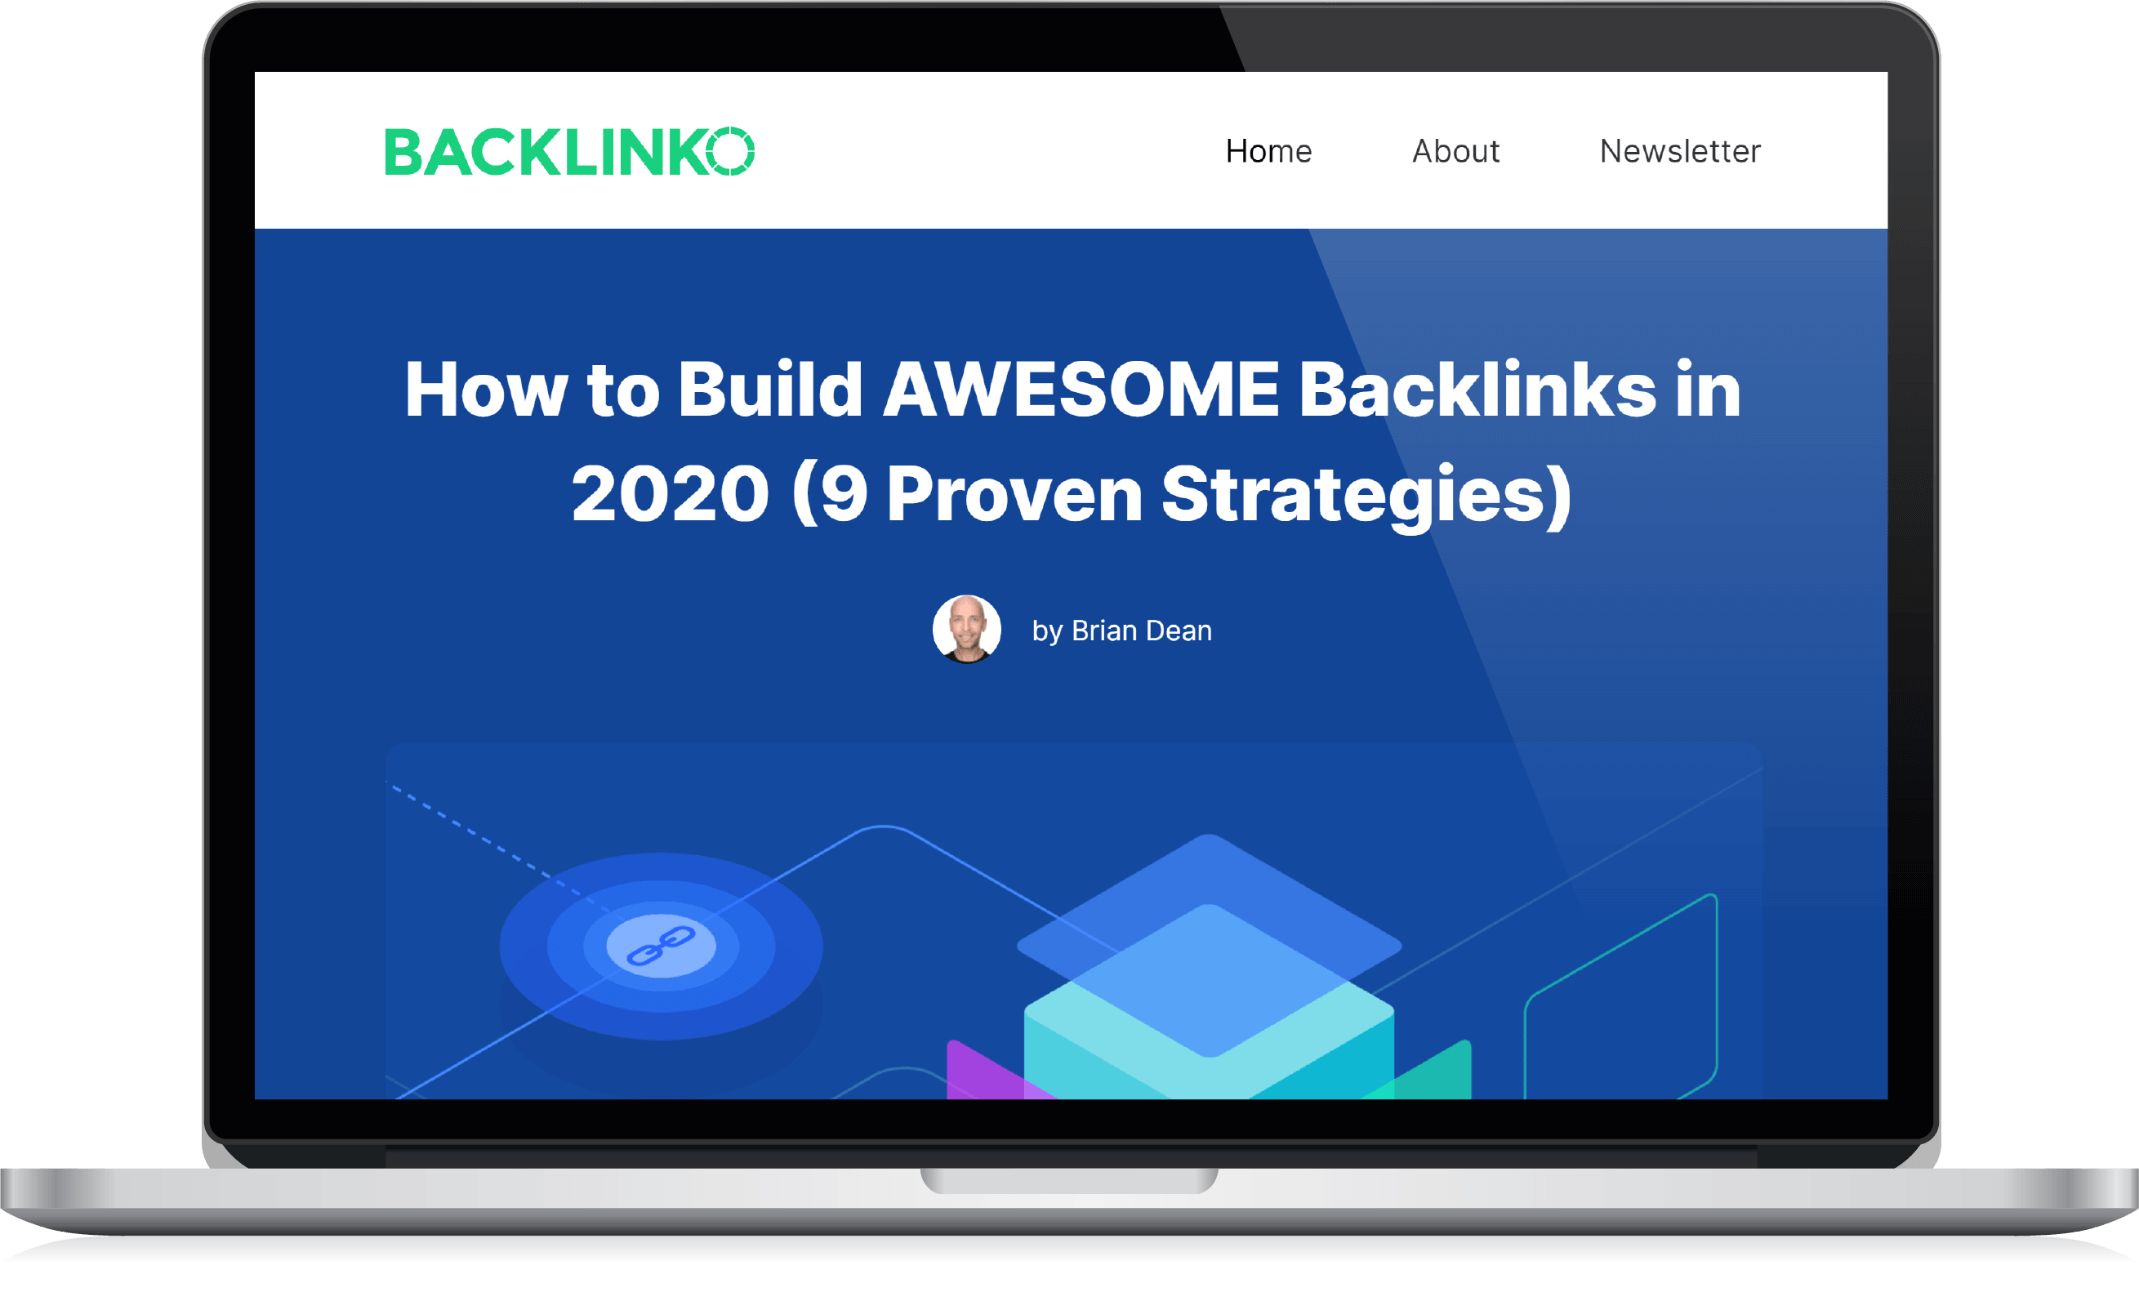 How to Build AWESOME Backlinks (9 Proven Strategies)